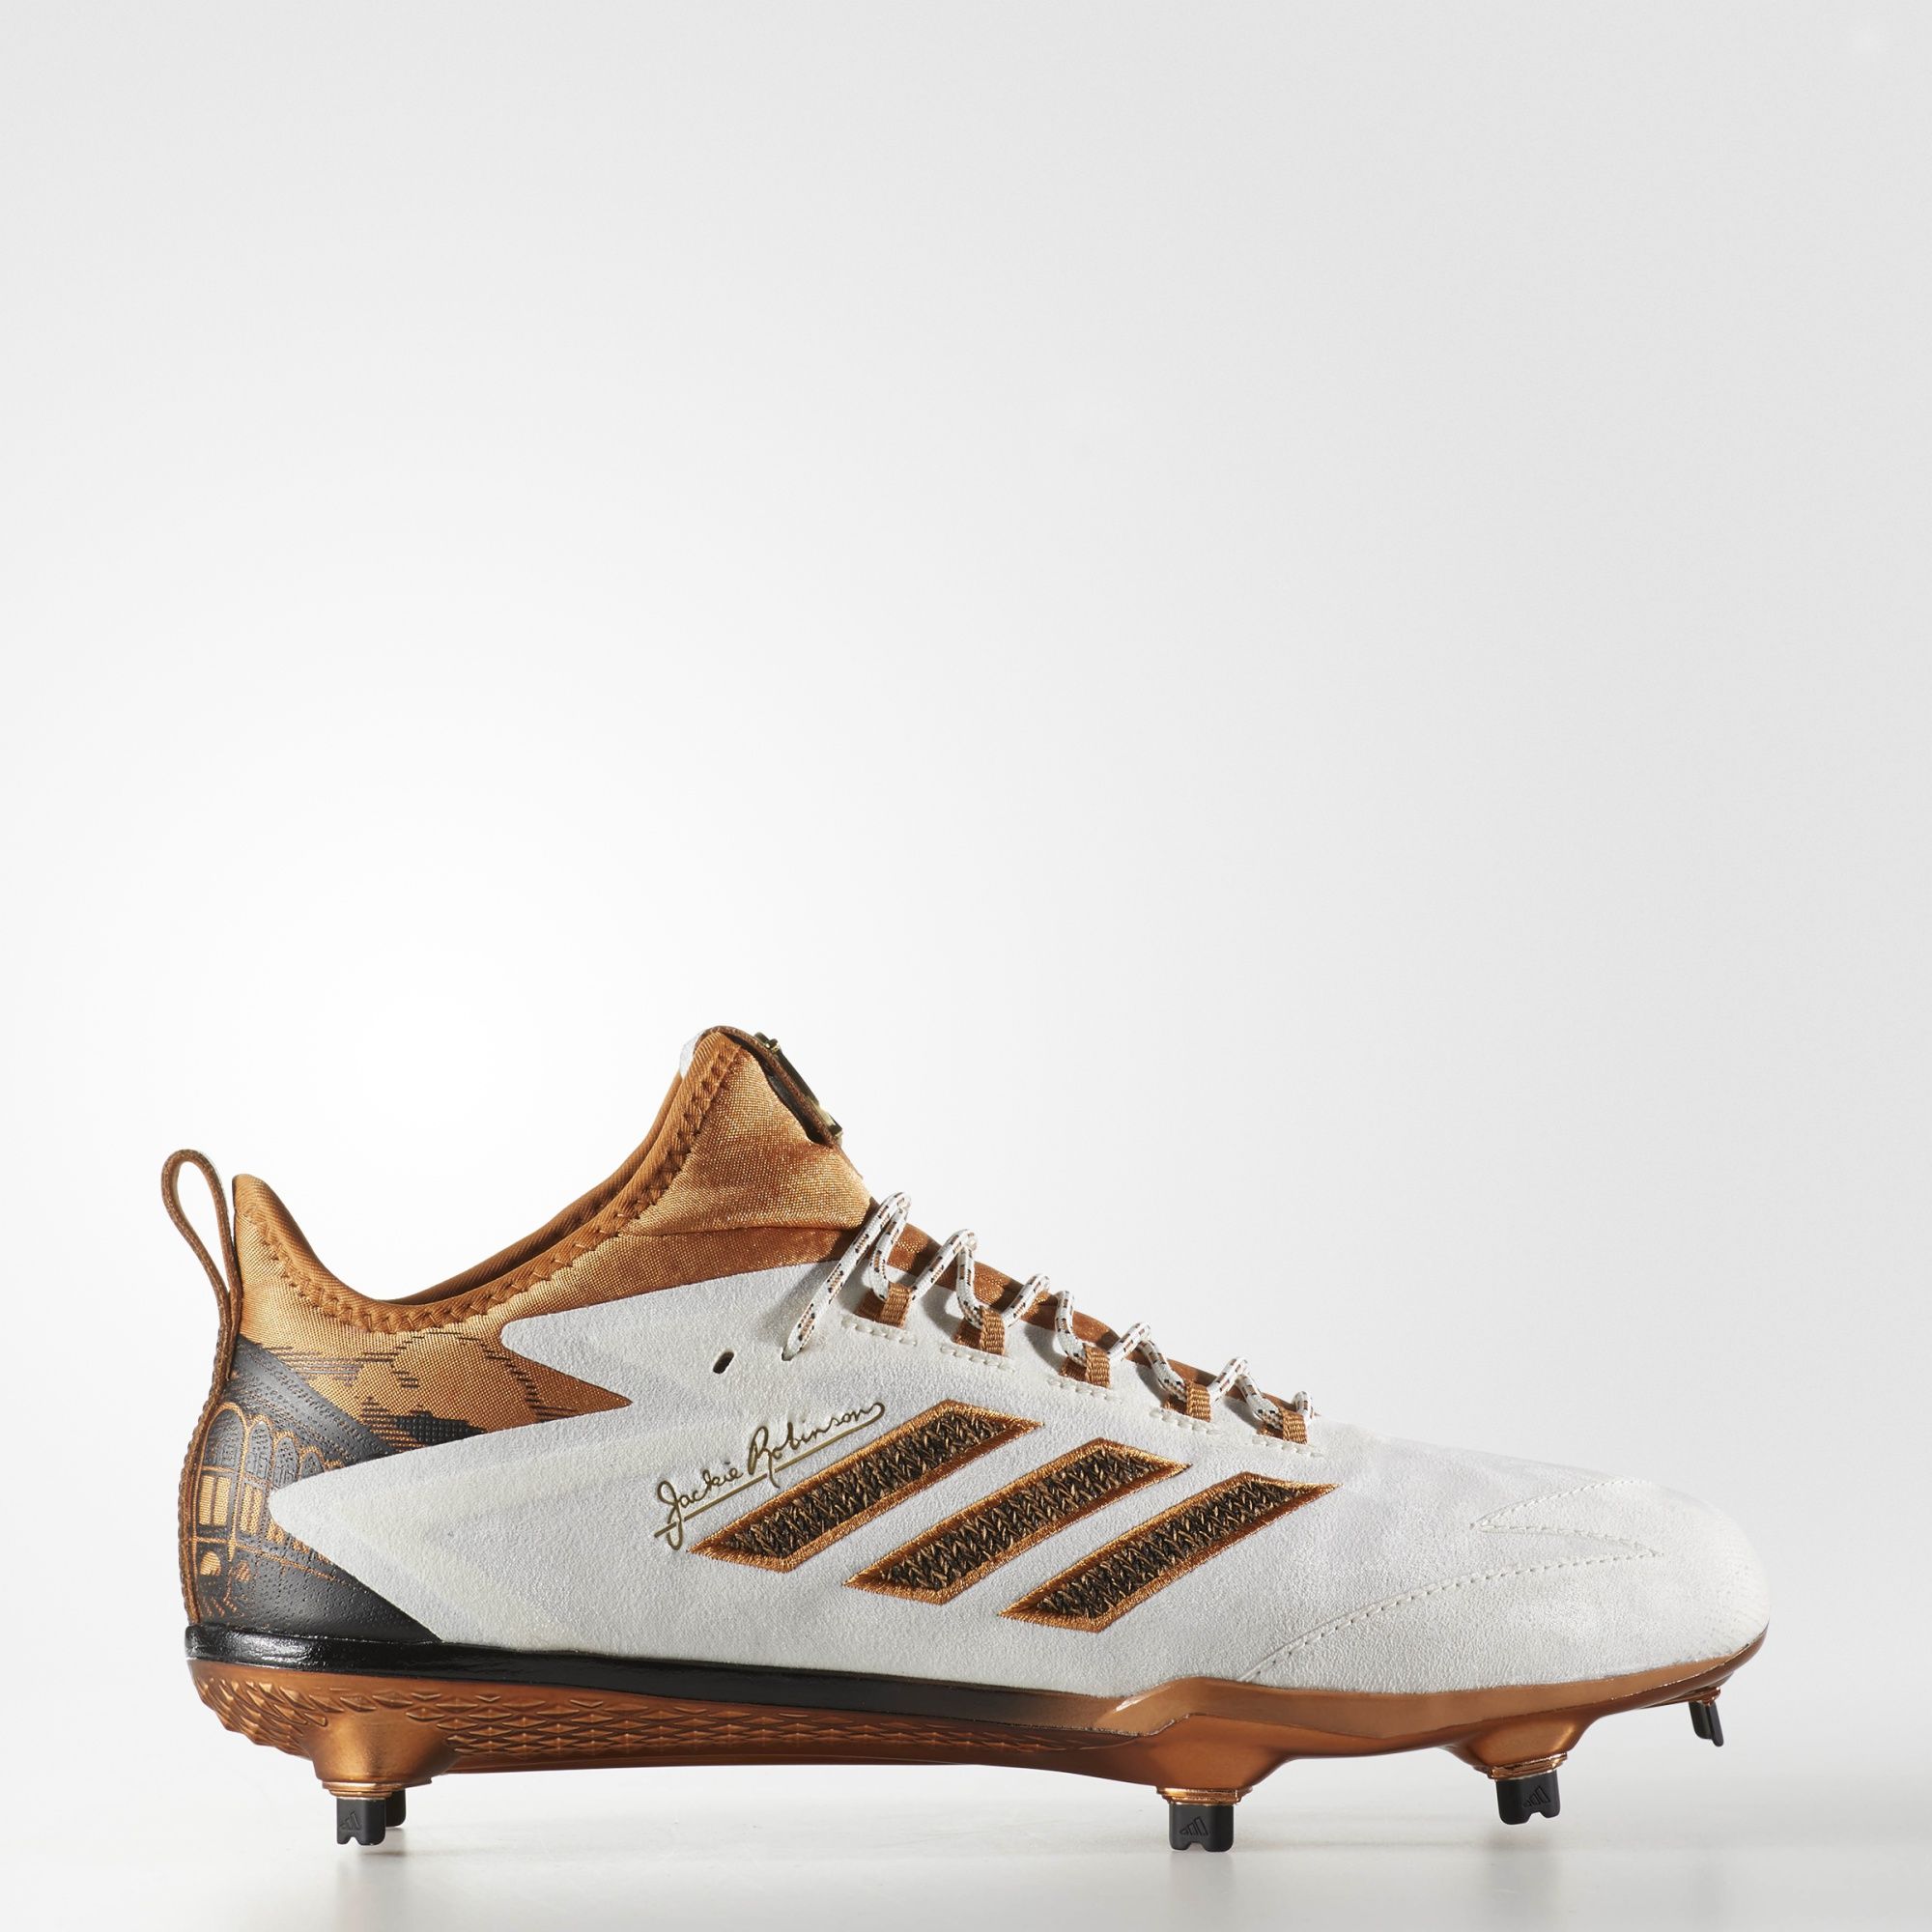 Adidas unveils special cleats for 